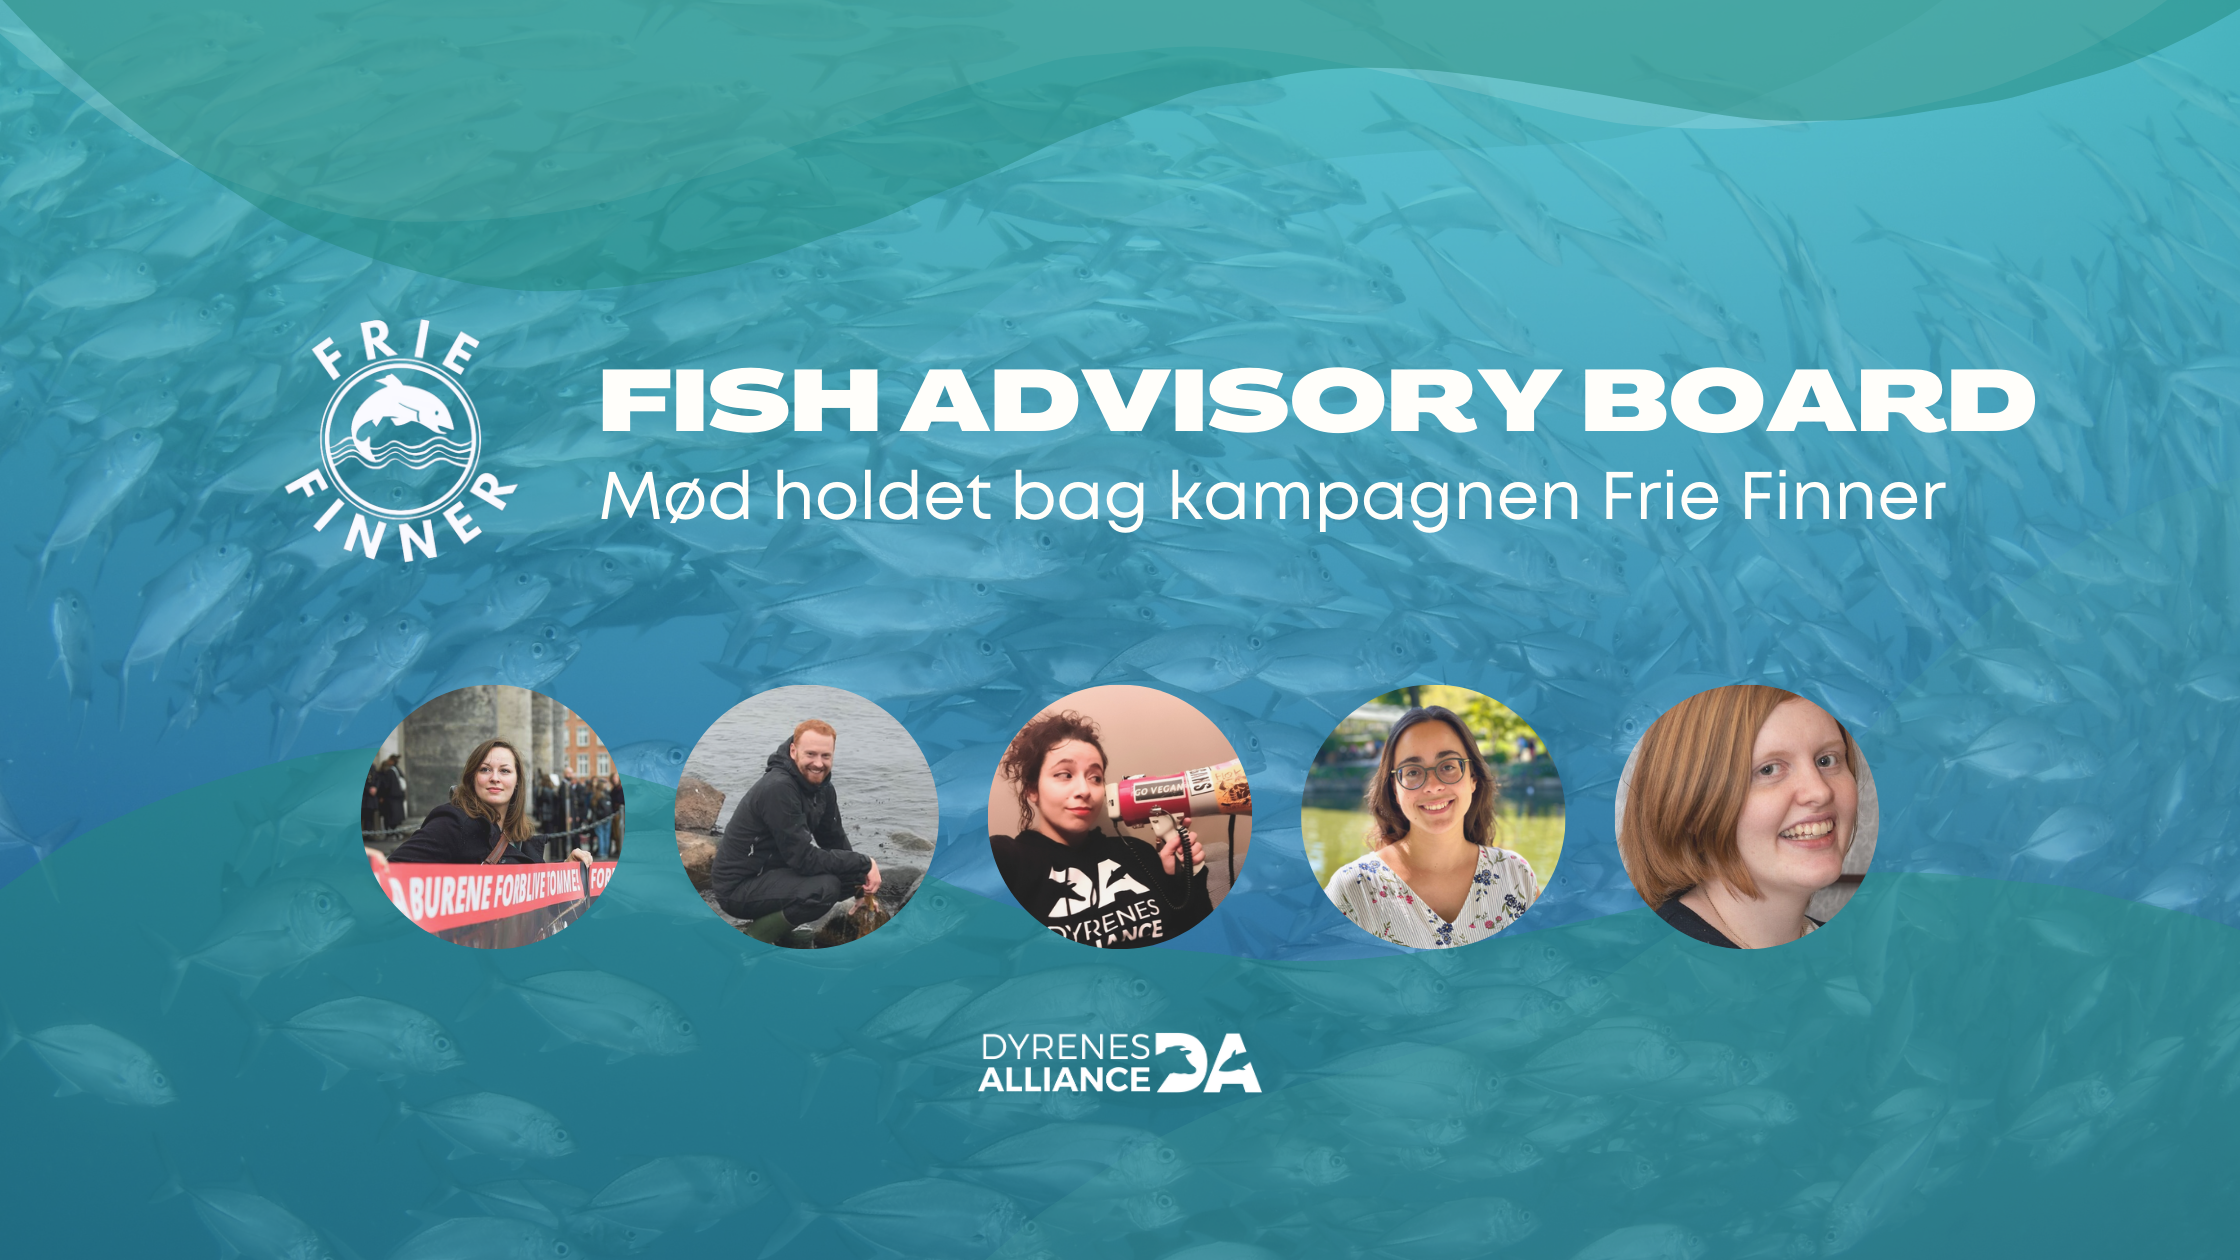 Fish Advisory Board: Meet the team behind the Free Fins campaign